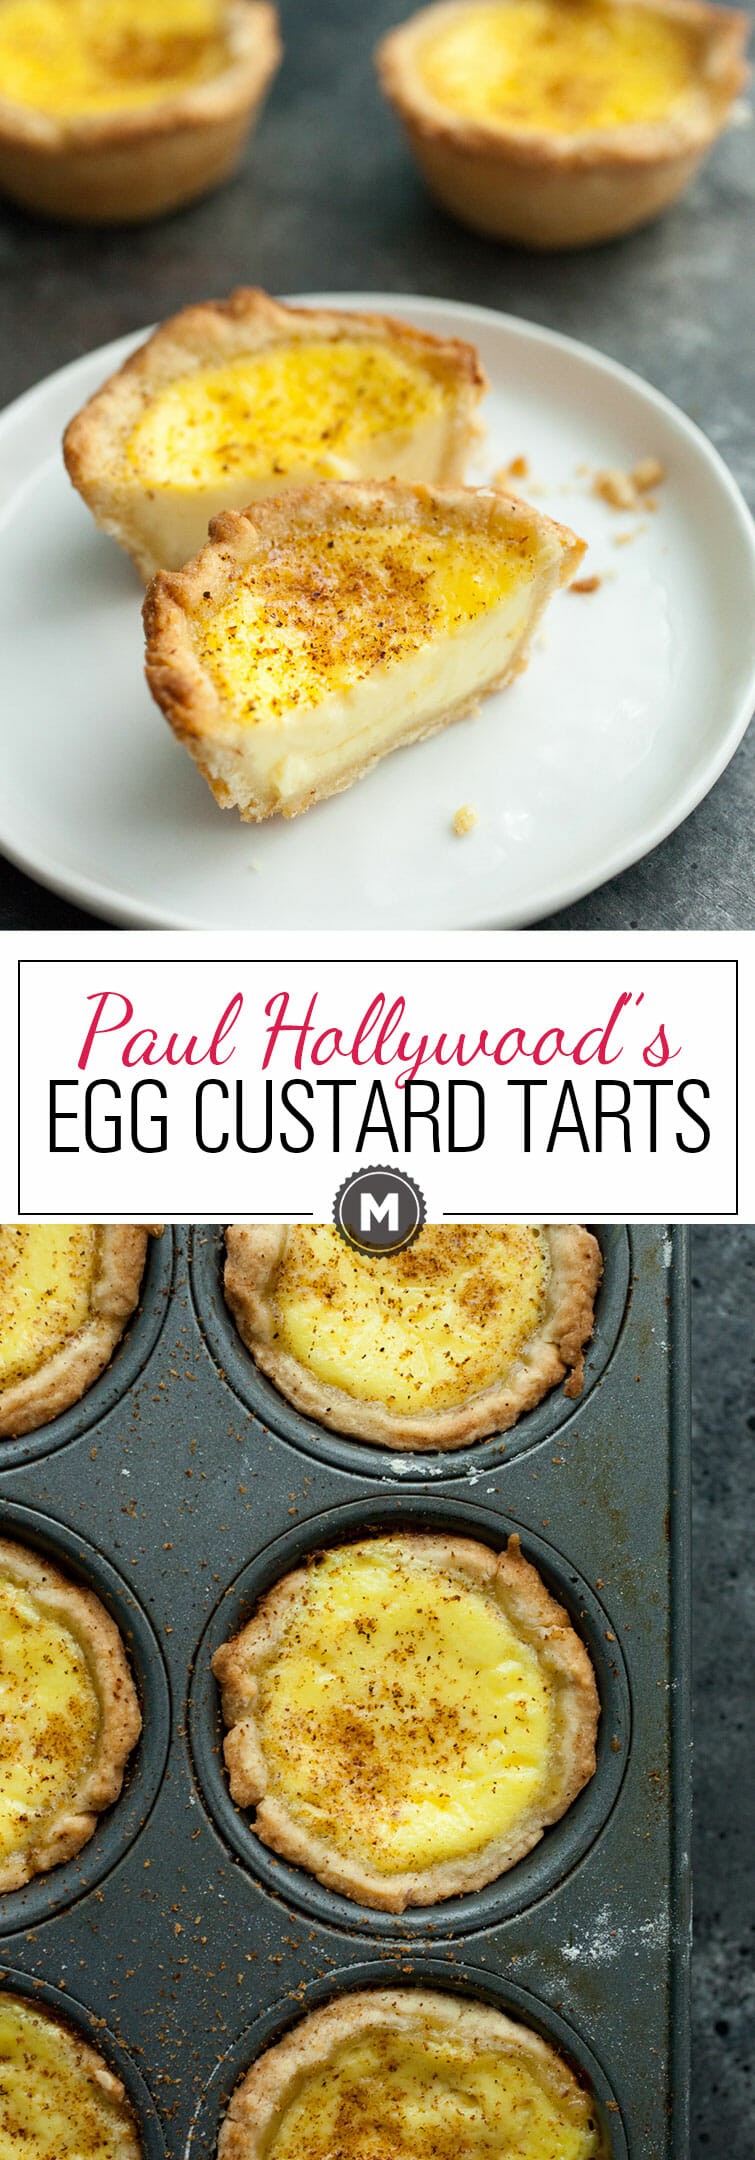 Egg Custard Tarts: Inspired by The Great British Baking Show, I tried my hand at a classic Egg Custard Tart. The results were mostly successful and definitely delicious! | macheesmo.com